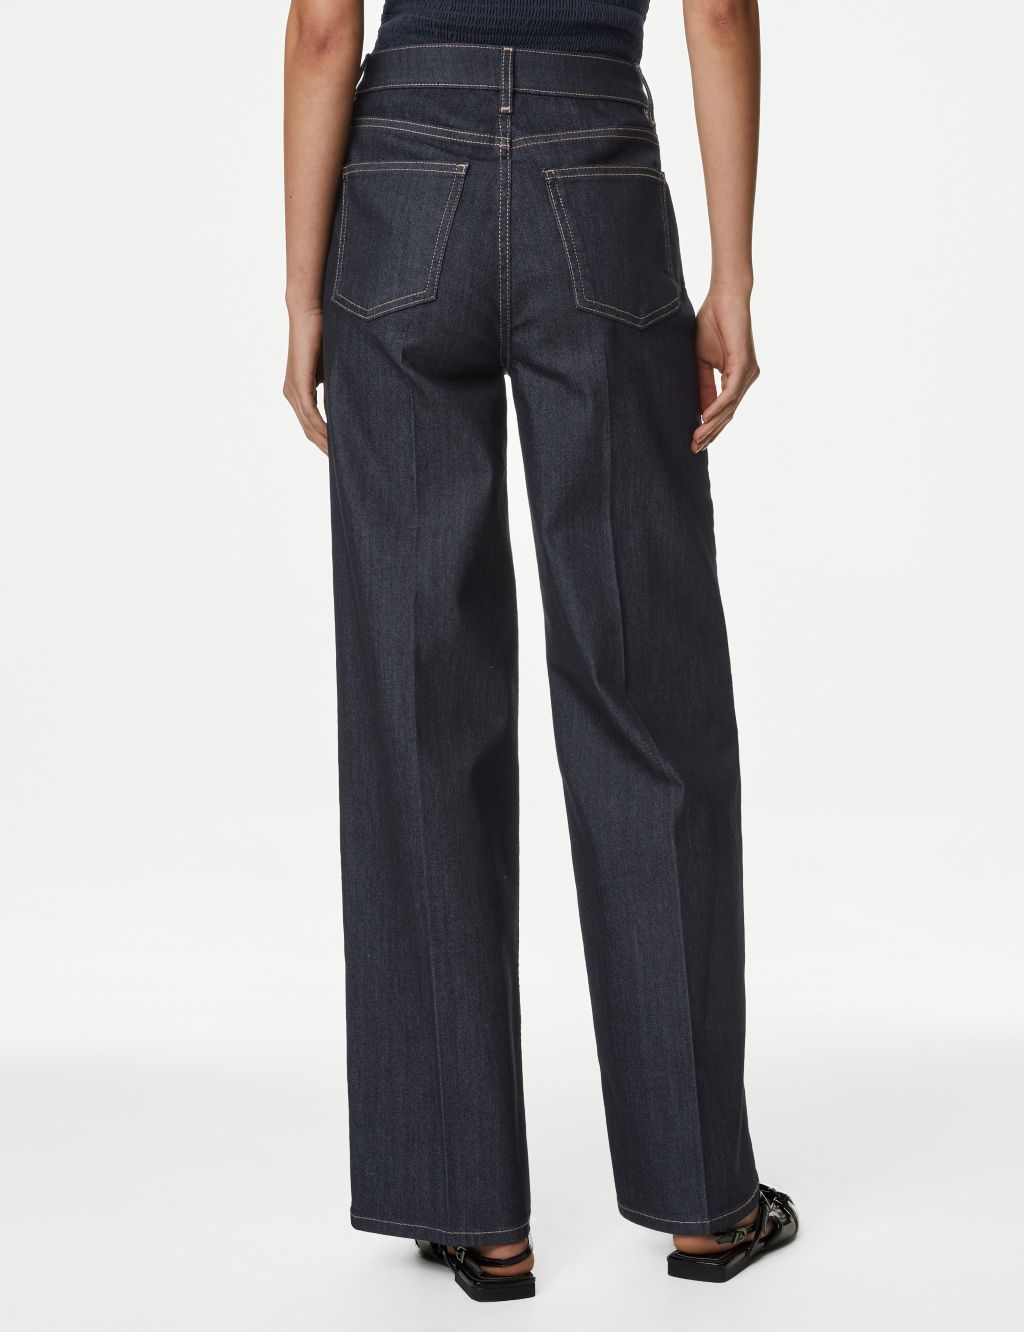 High Waisted Smart Wide Leg Jeans image 5